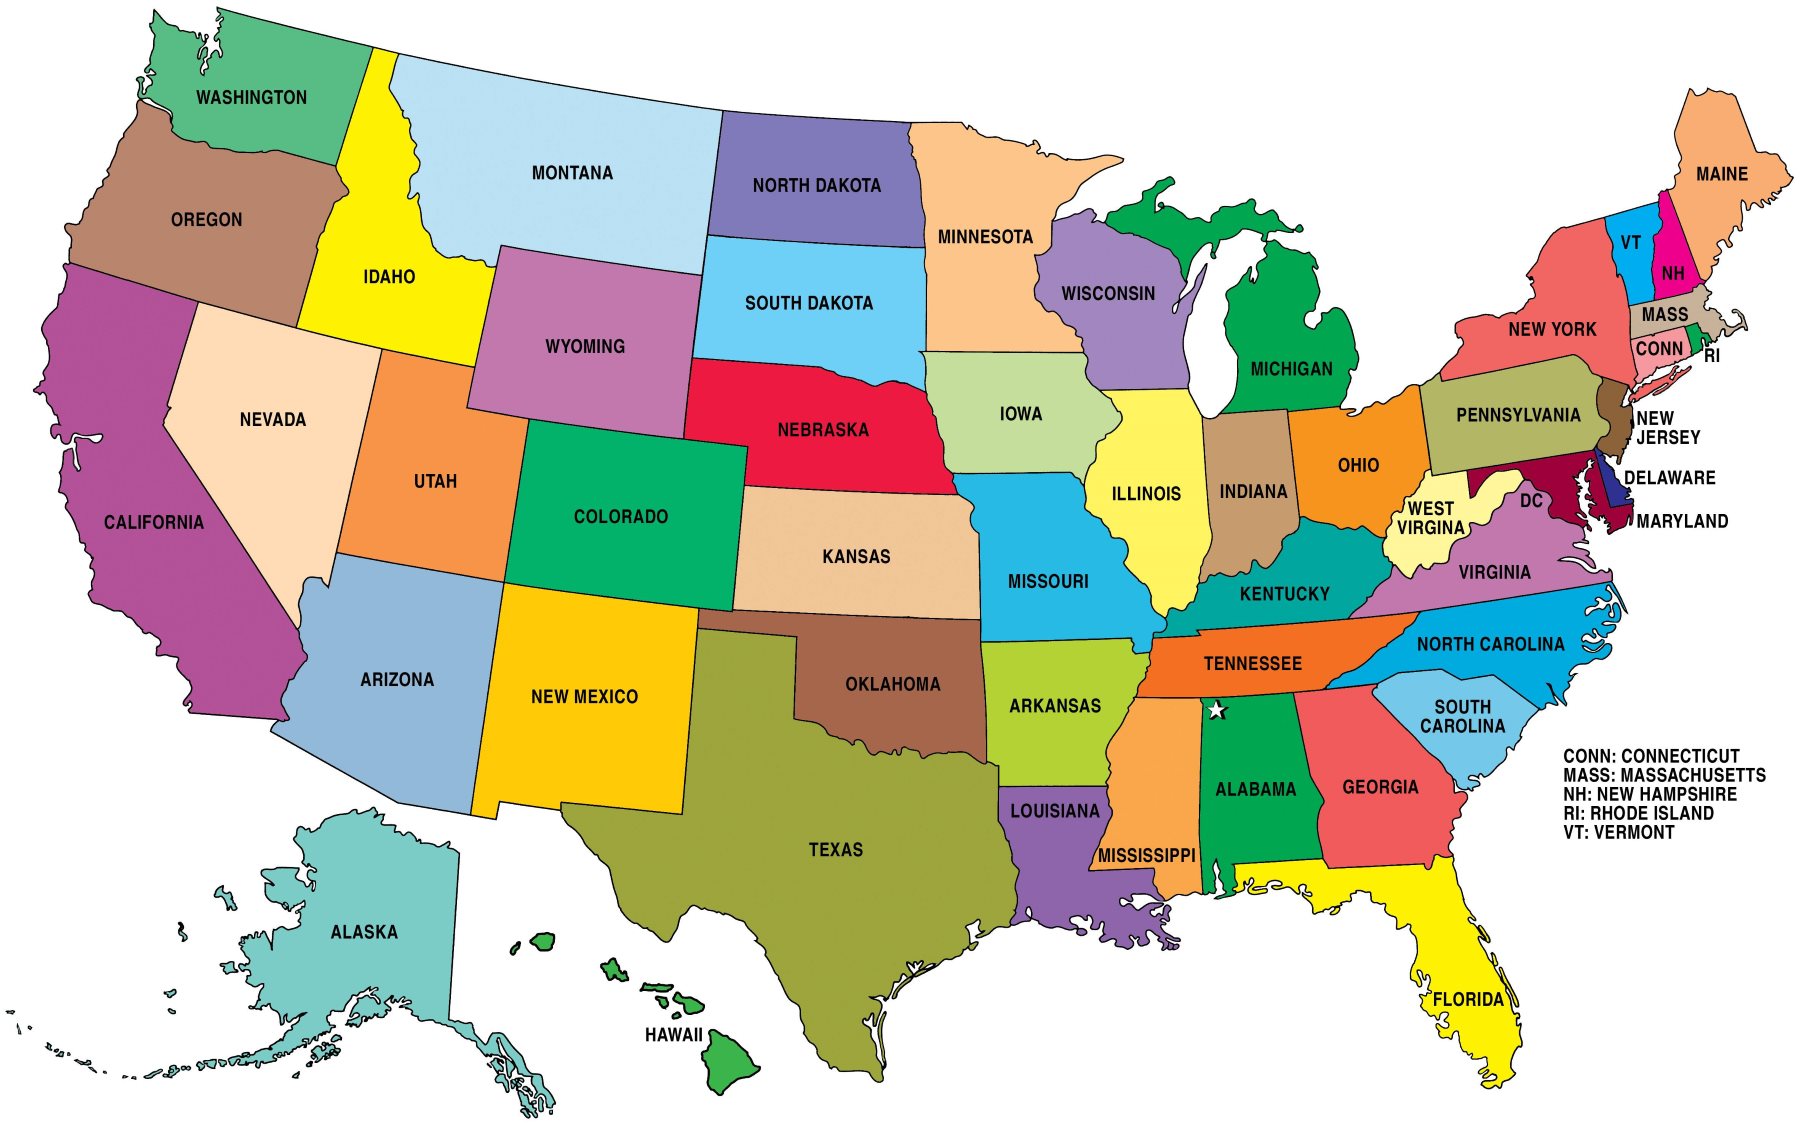 The number of states in America